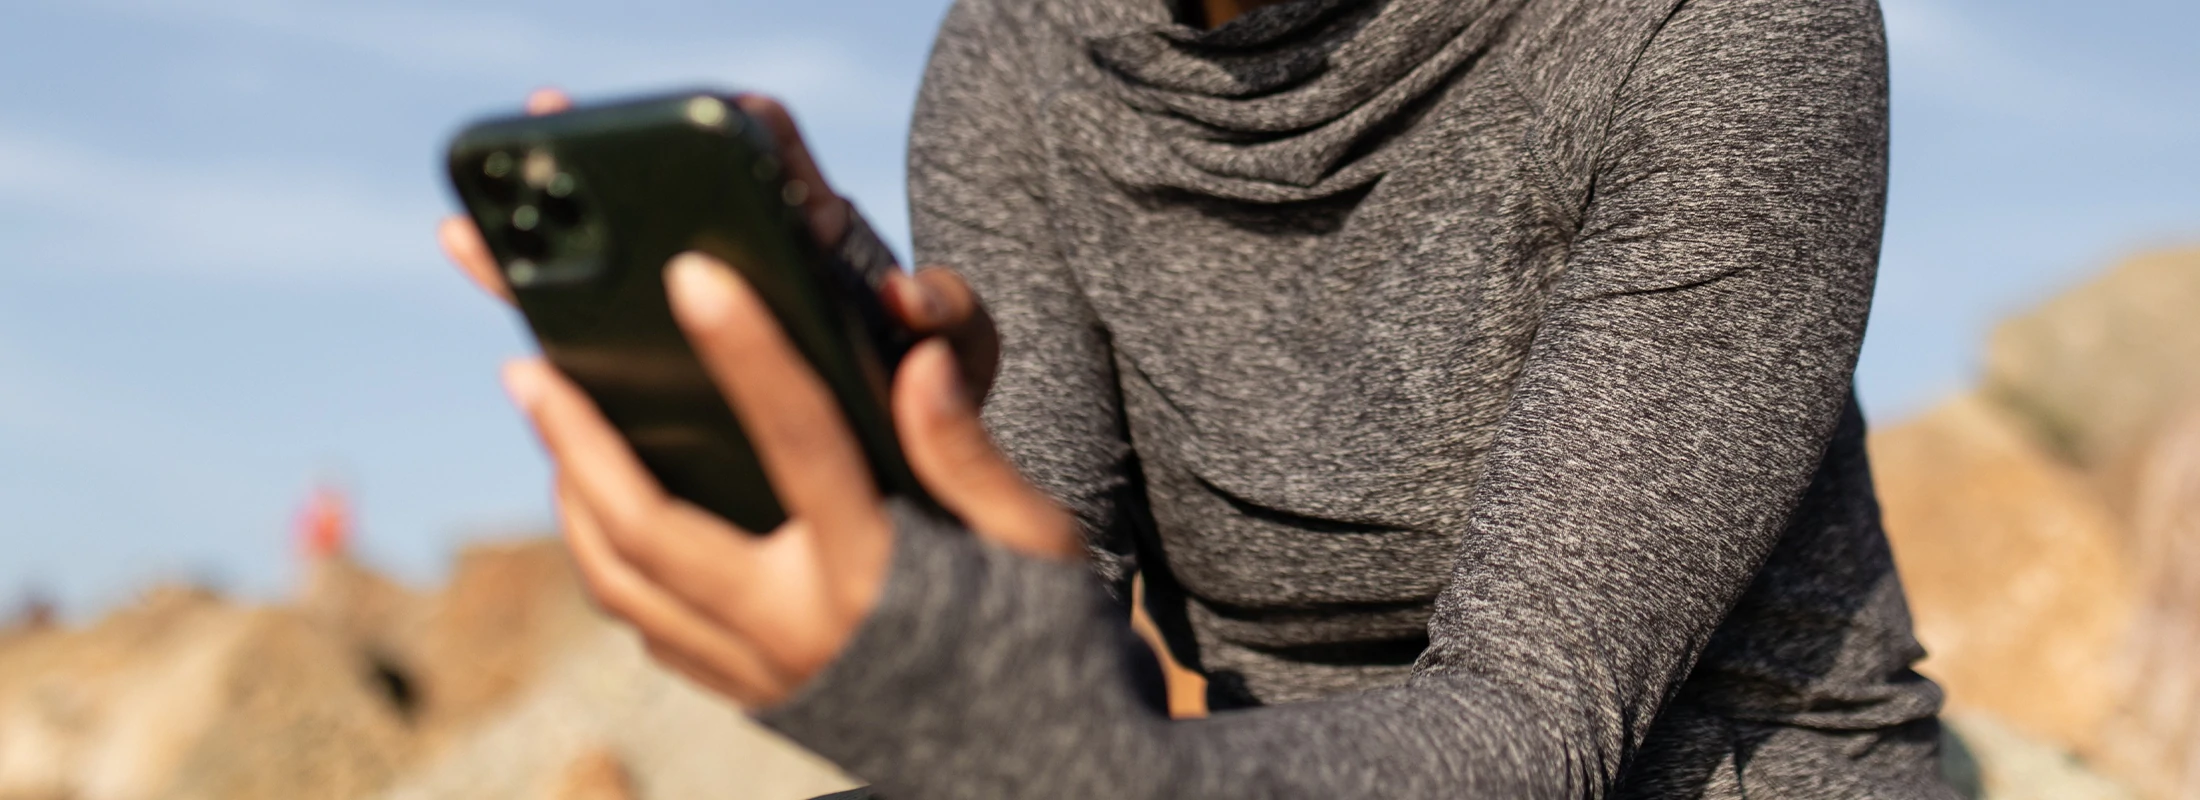 A person using their phone in a grey hipster sweatshirt with their thumb in a hole in the sleeve.